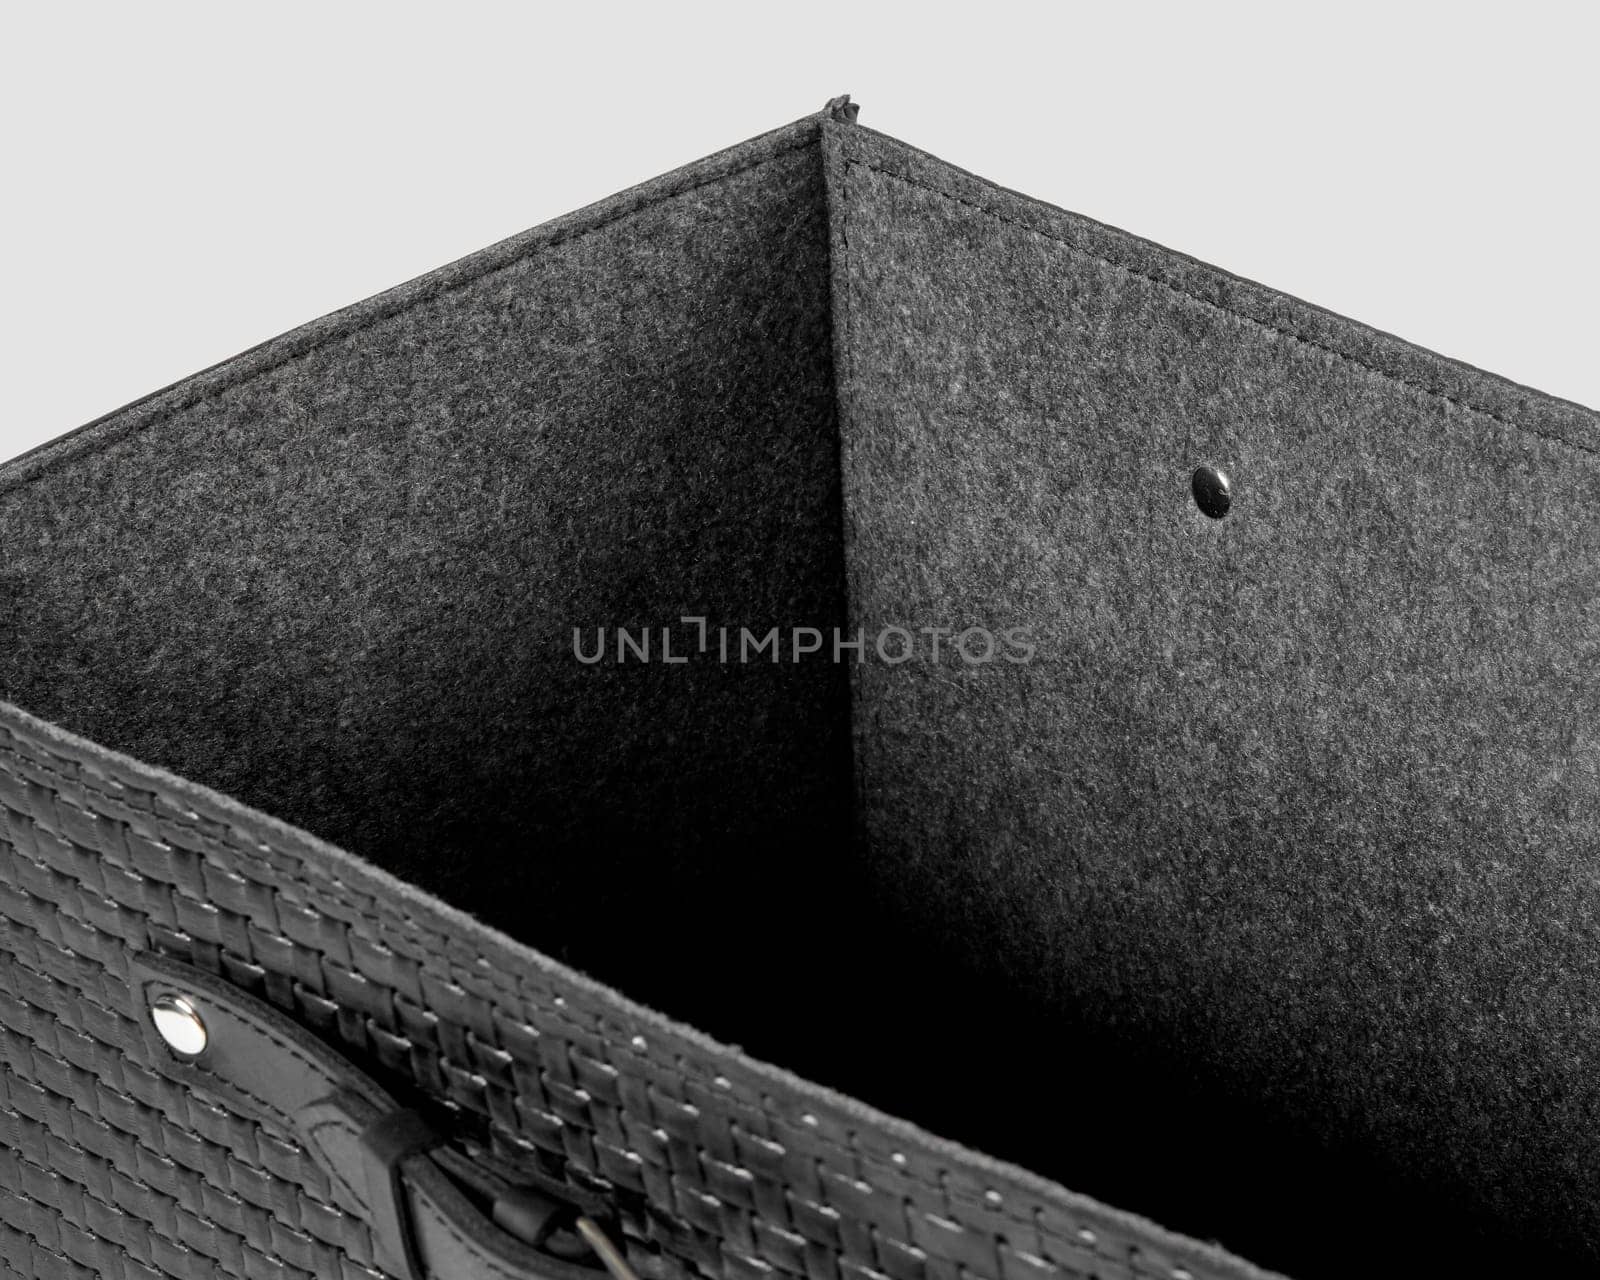 Closeup of black leather woven box with gray felt lining by nazarovsergey